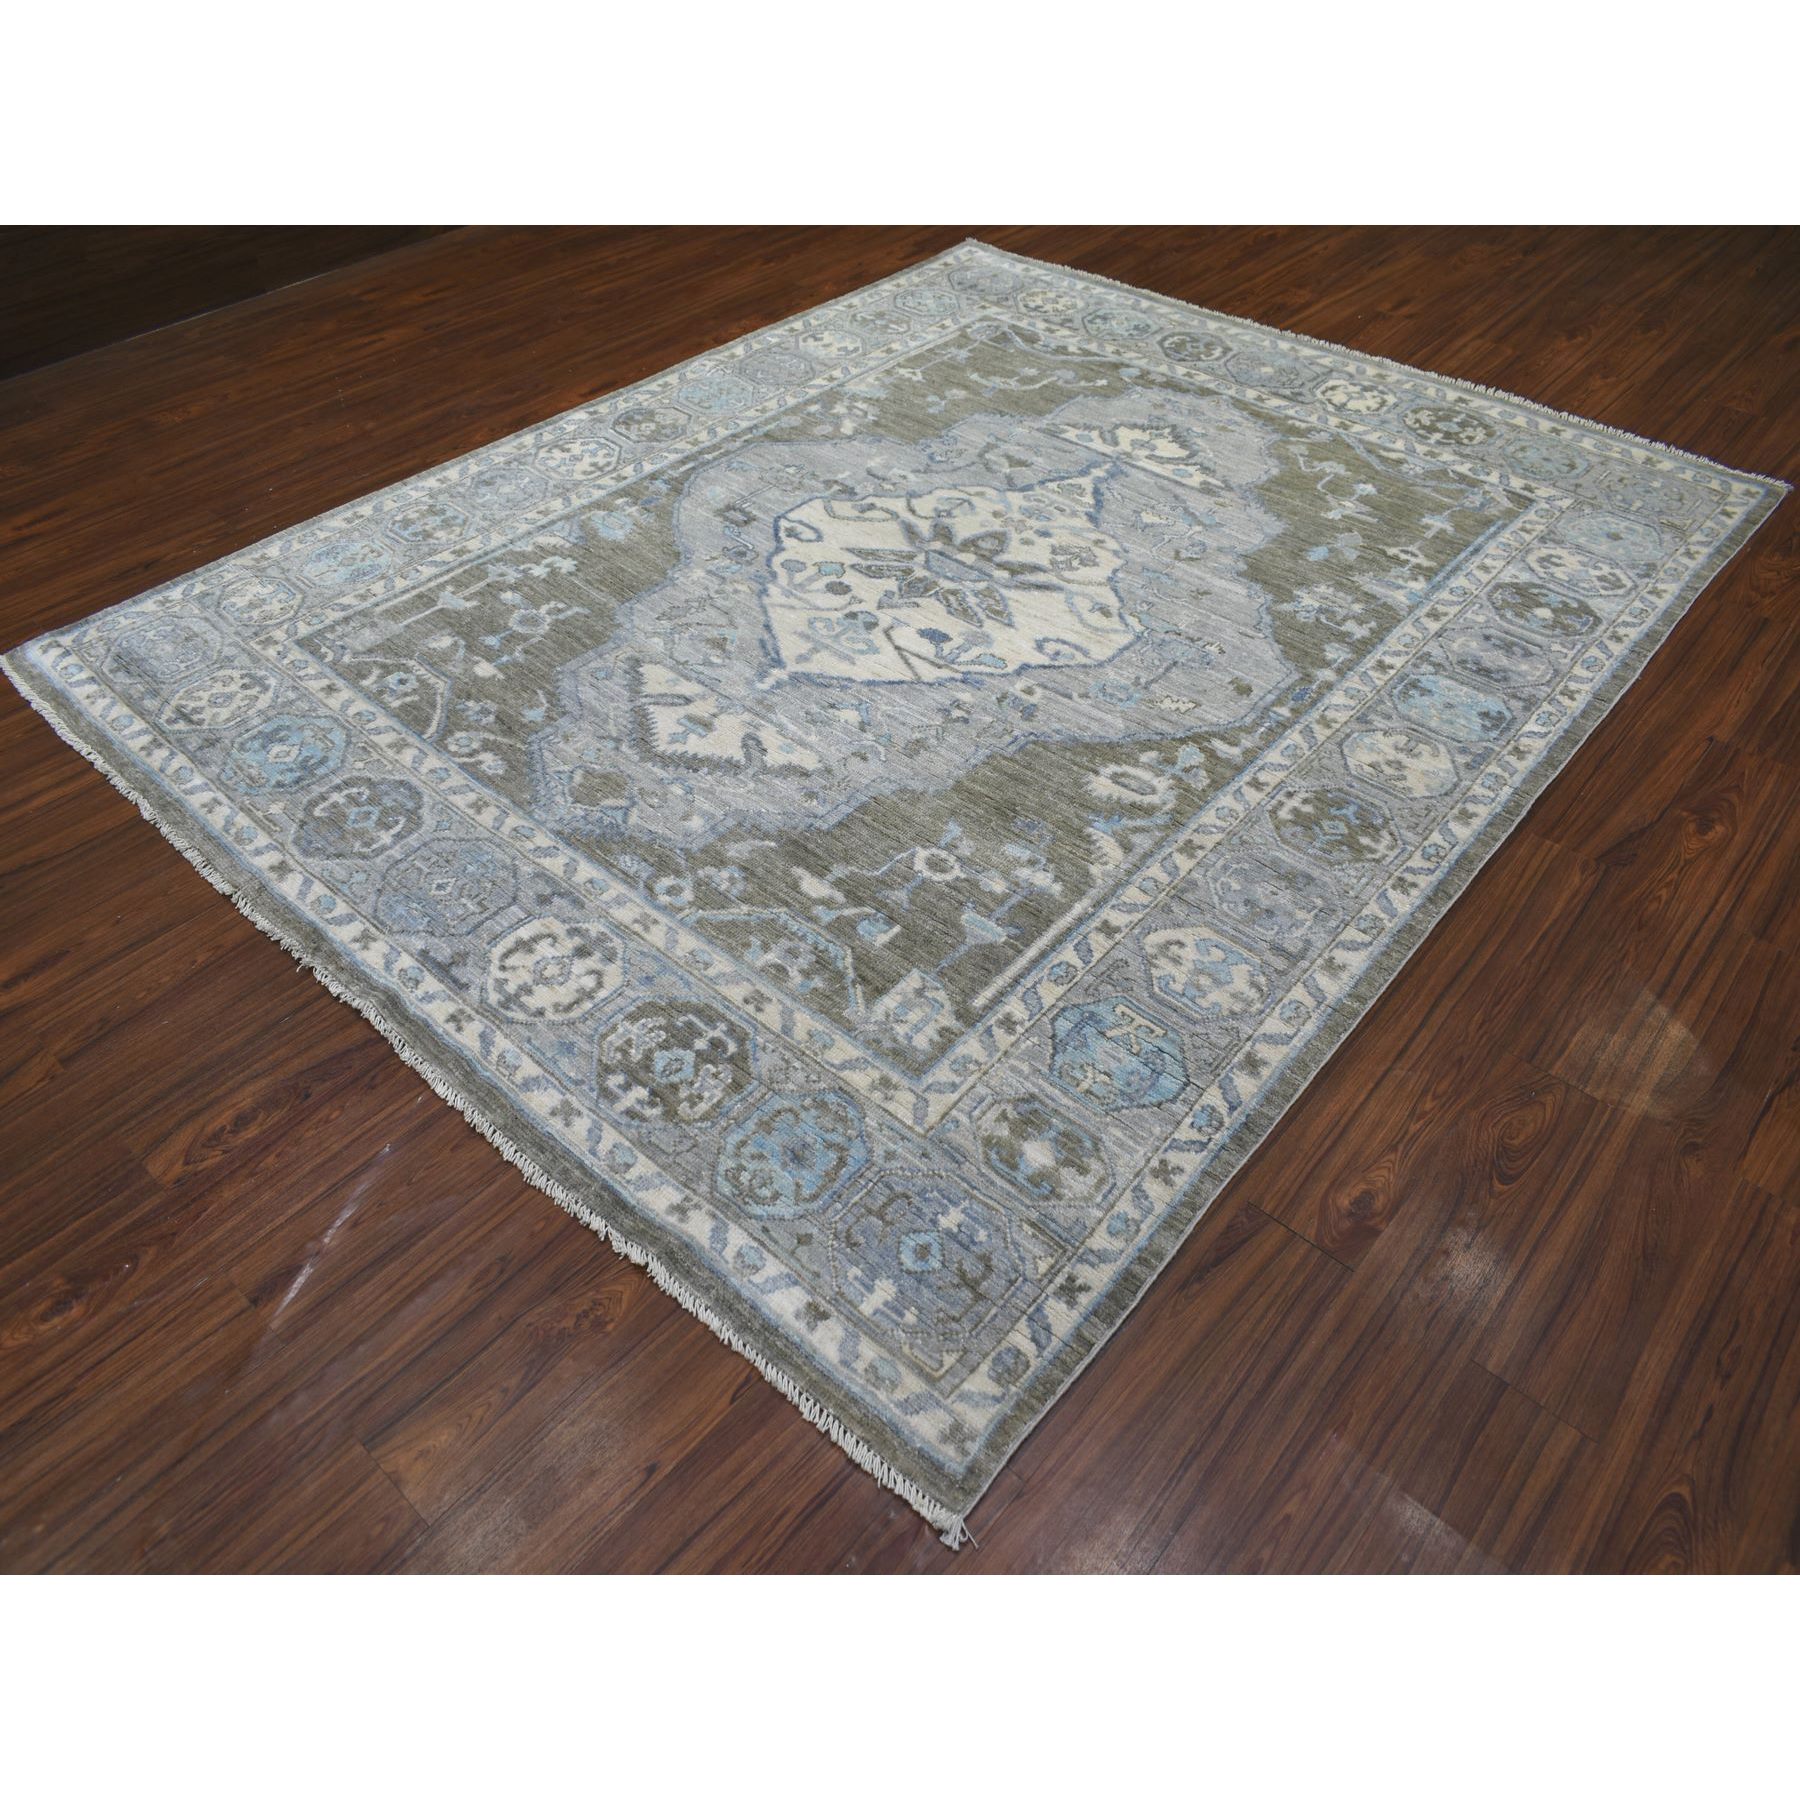 8'x9'9" Faded Taupe, Anatolian Design with Large Medallion Design Natural Dyes, Soft and Supple Wool Hand Woven, Oriental Rug 